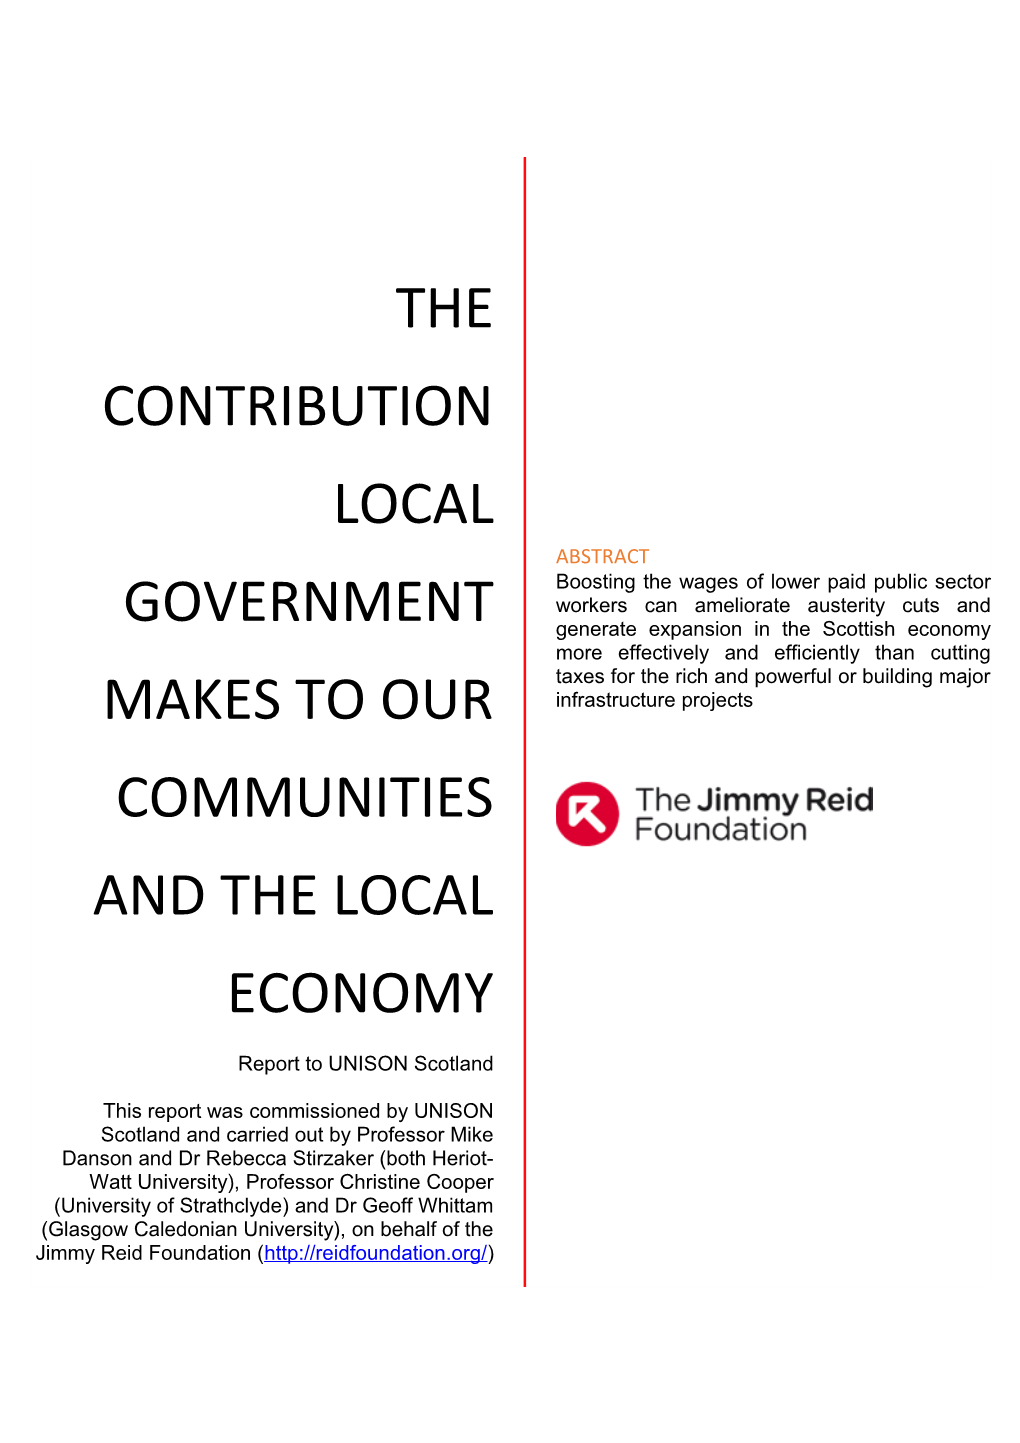 The Contribution Local Government Makes to Our Communities and the Local Economy